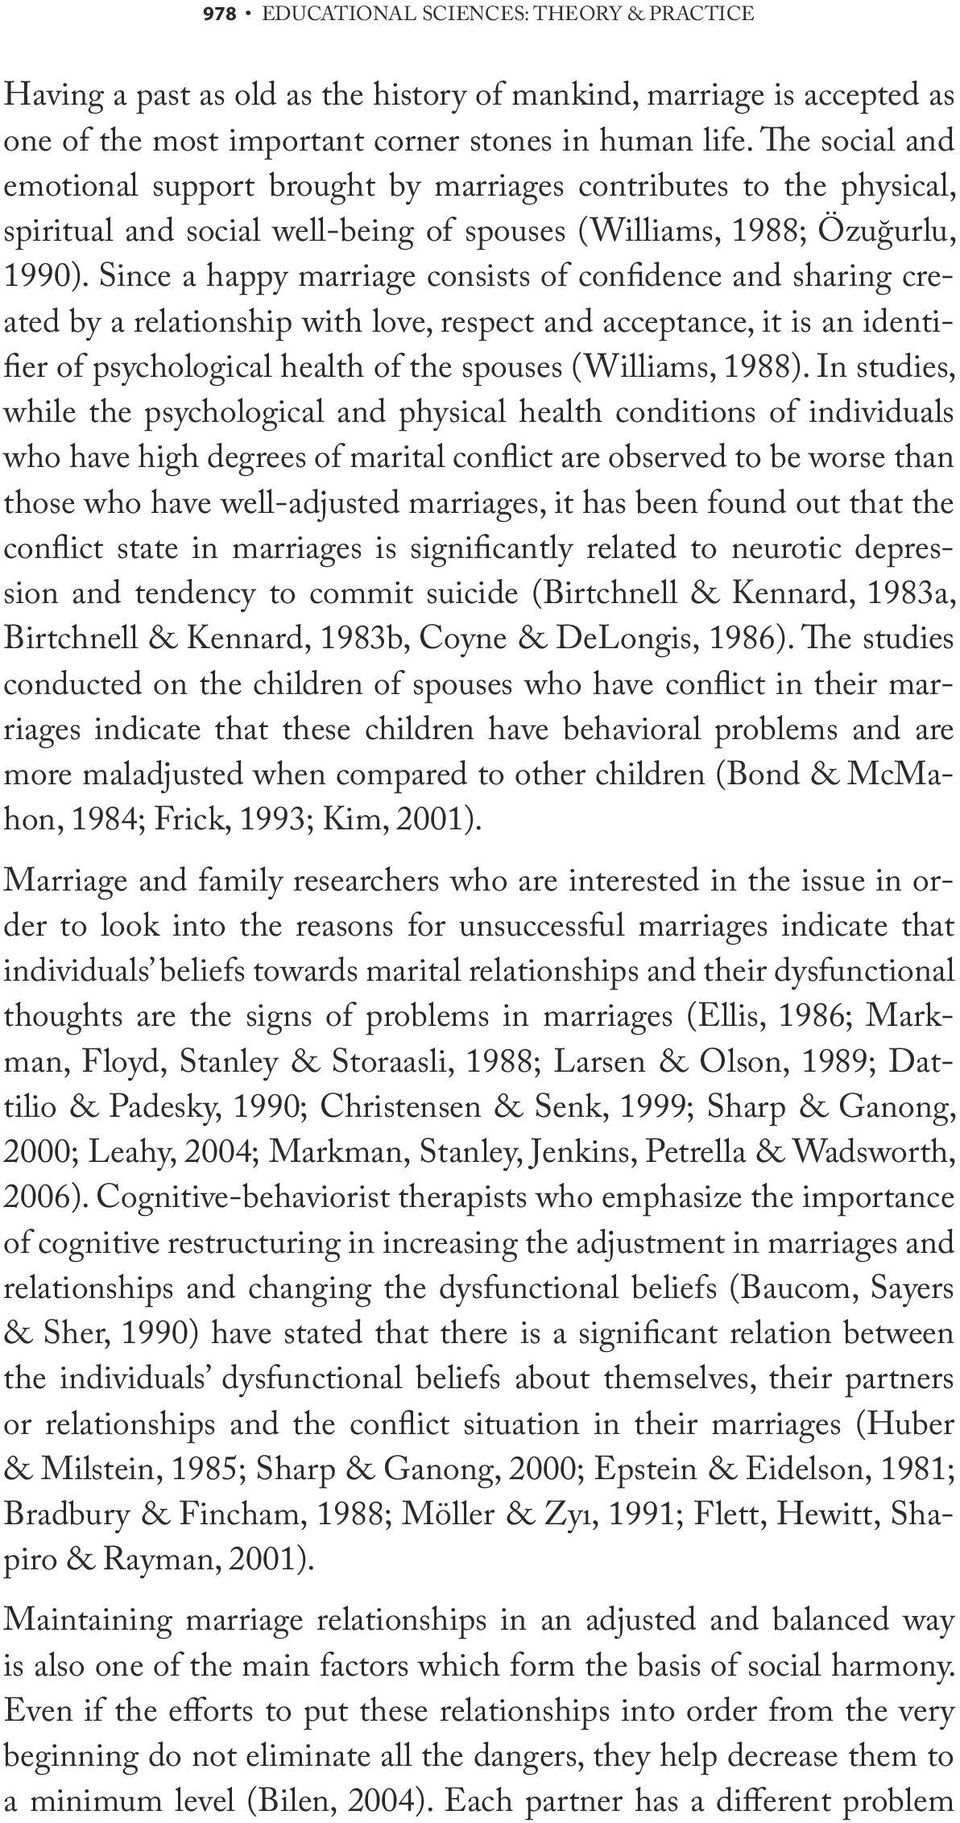 Since a happy marriage consists of confidence and sharing created by a relationship with love, respect and acceptance, it is an identifier of psychological health of the spouses (Williams, 1988).